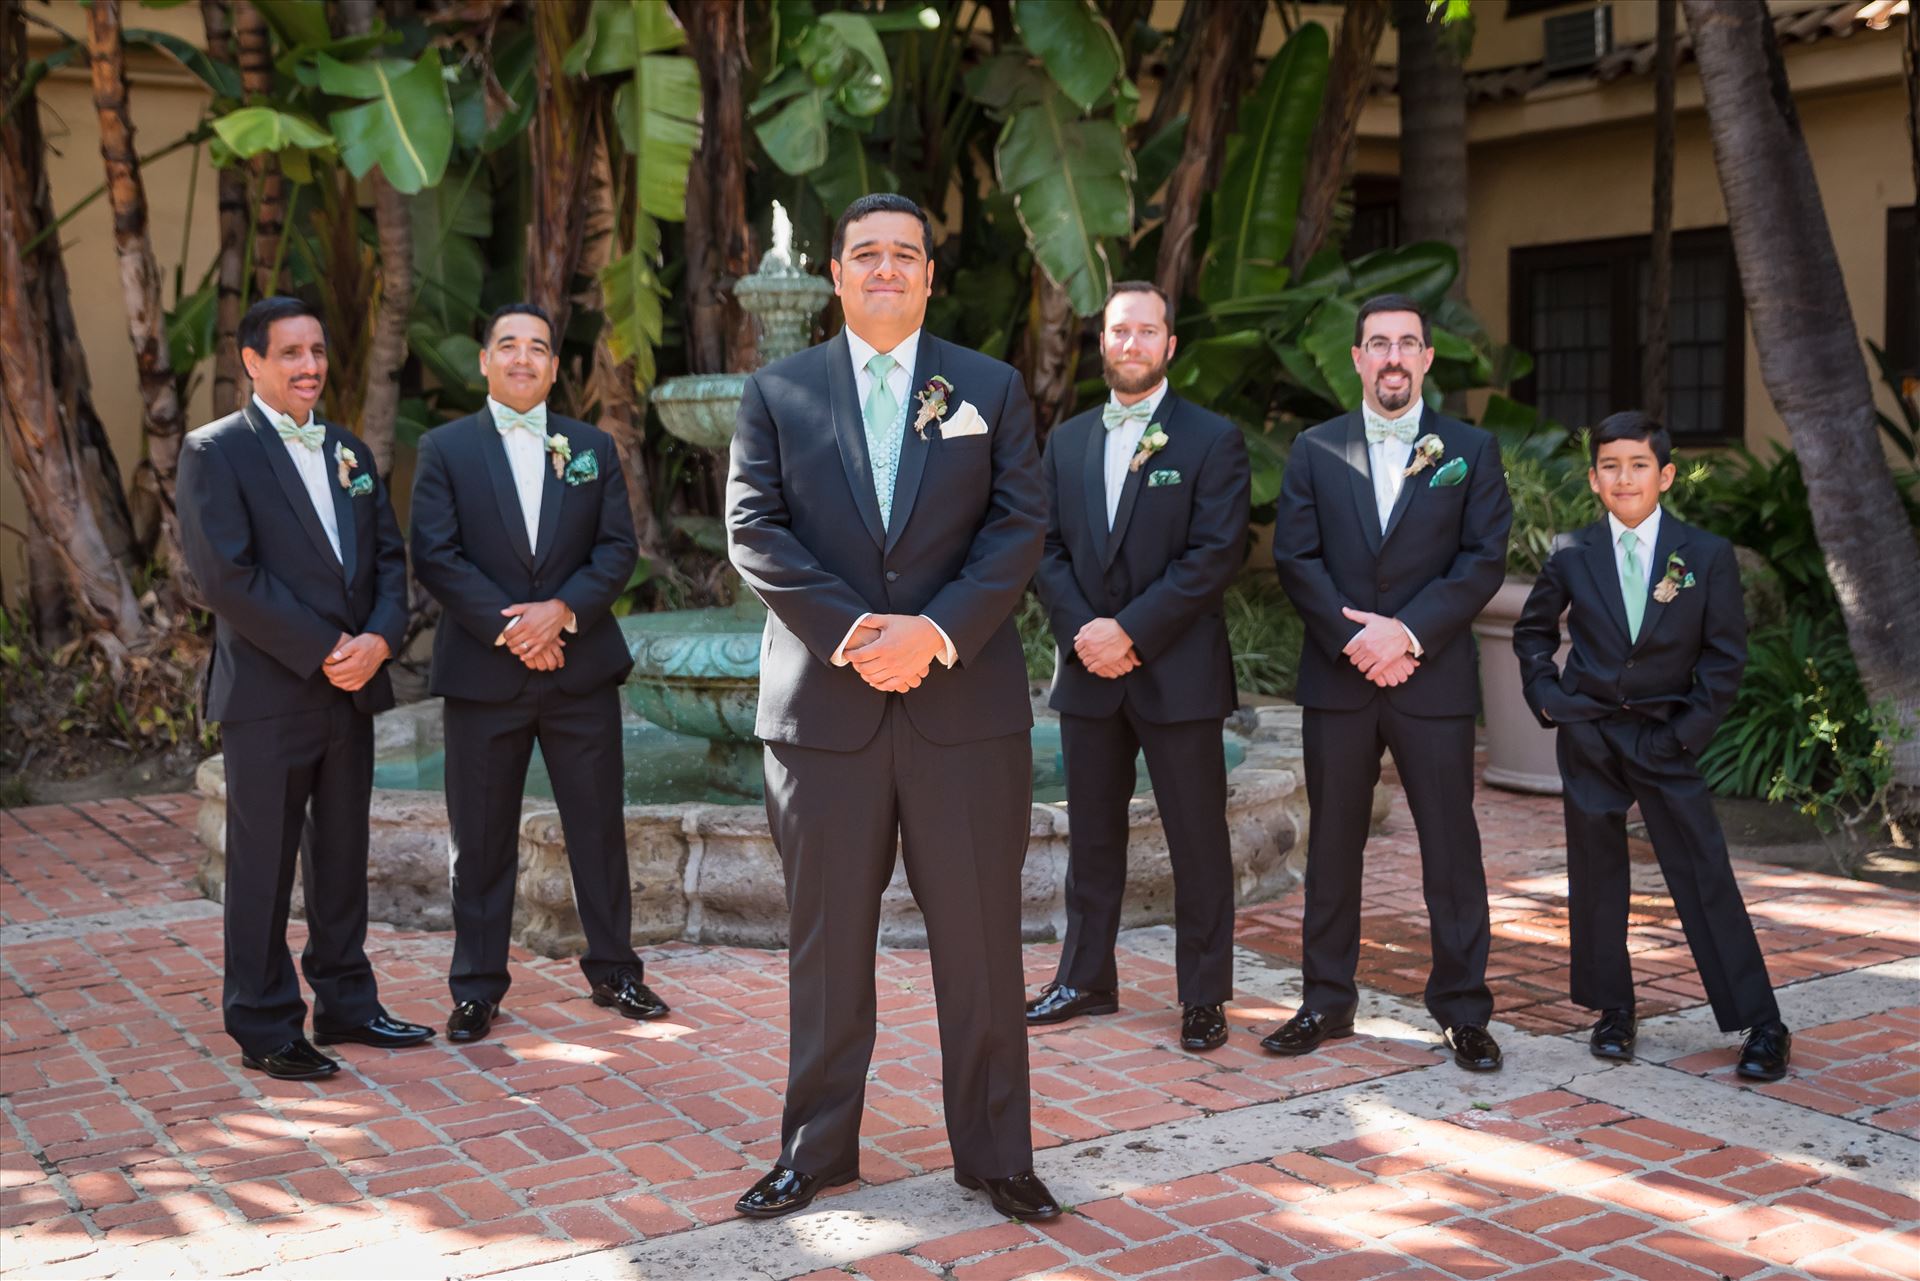 Mary and Alejandro 46 Wedding photography at the Historic Santa Maria Inn in Santa Maria, California by Mirror's Edge Photography. Groom and his groomsmen by the fountain by Sarah Williams